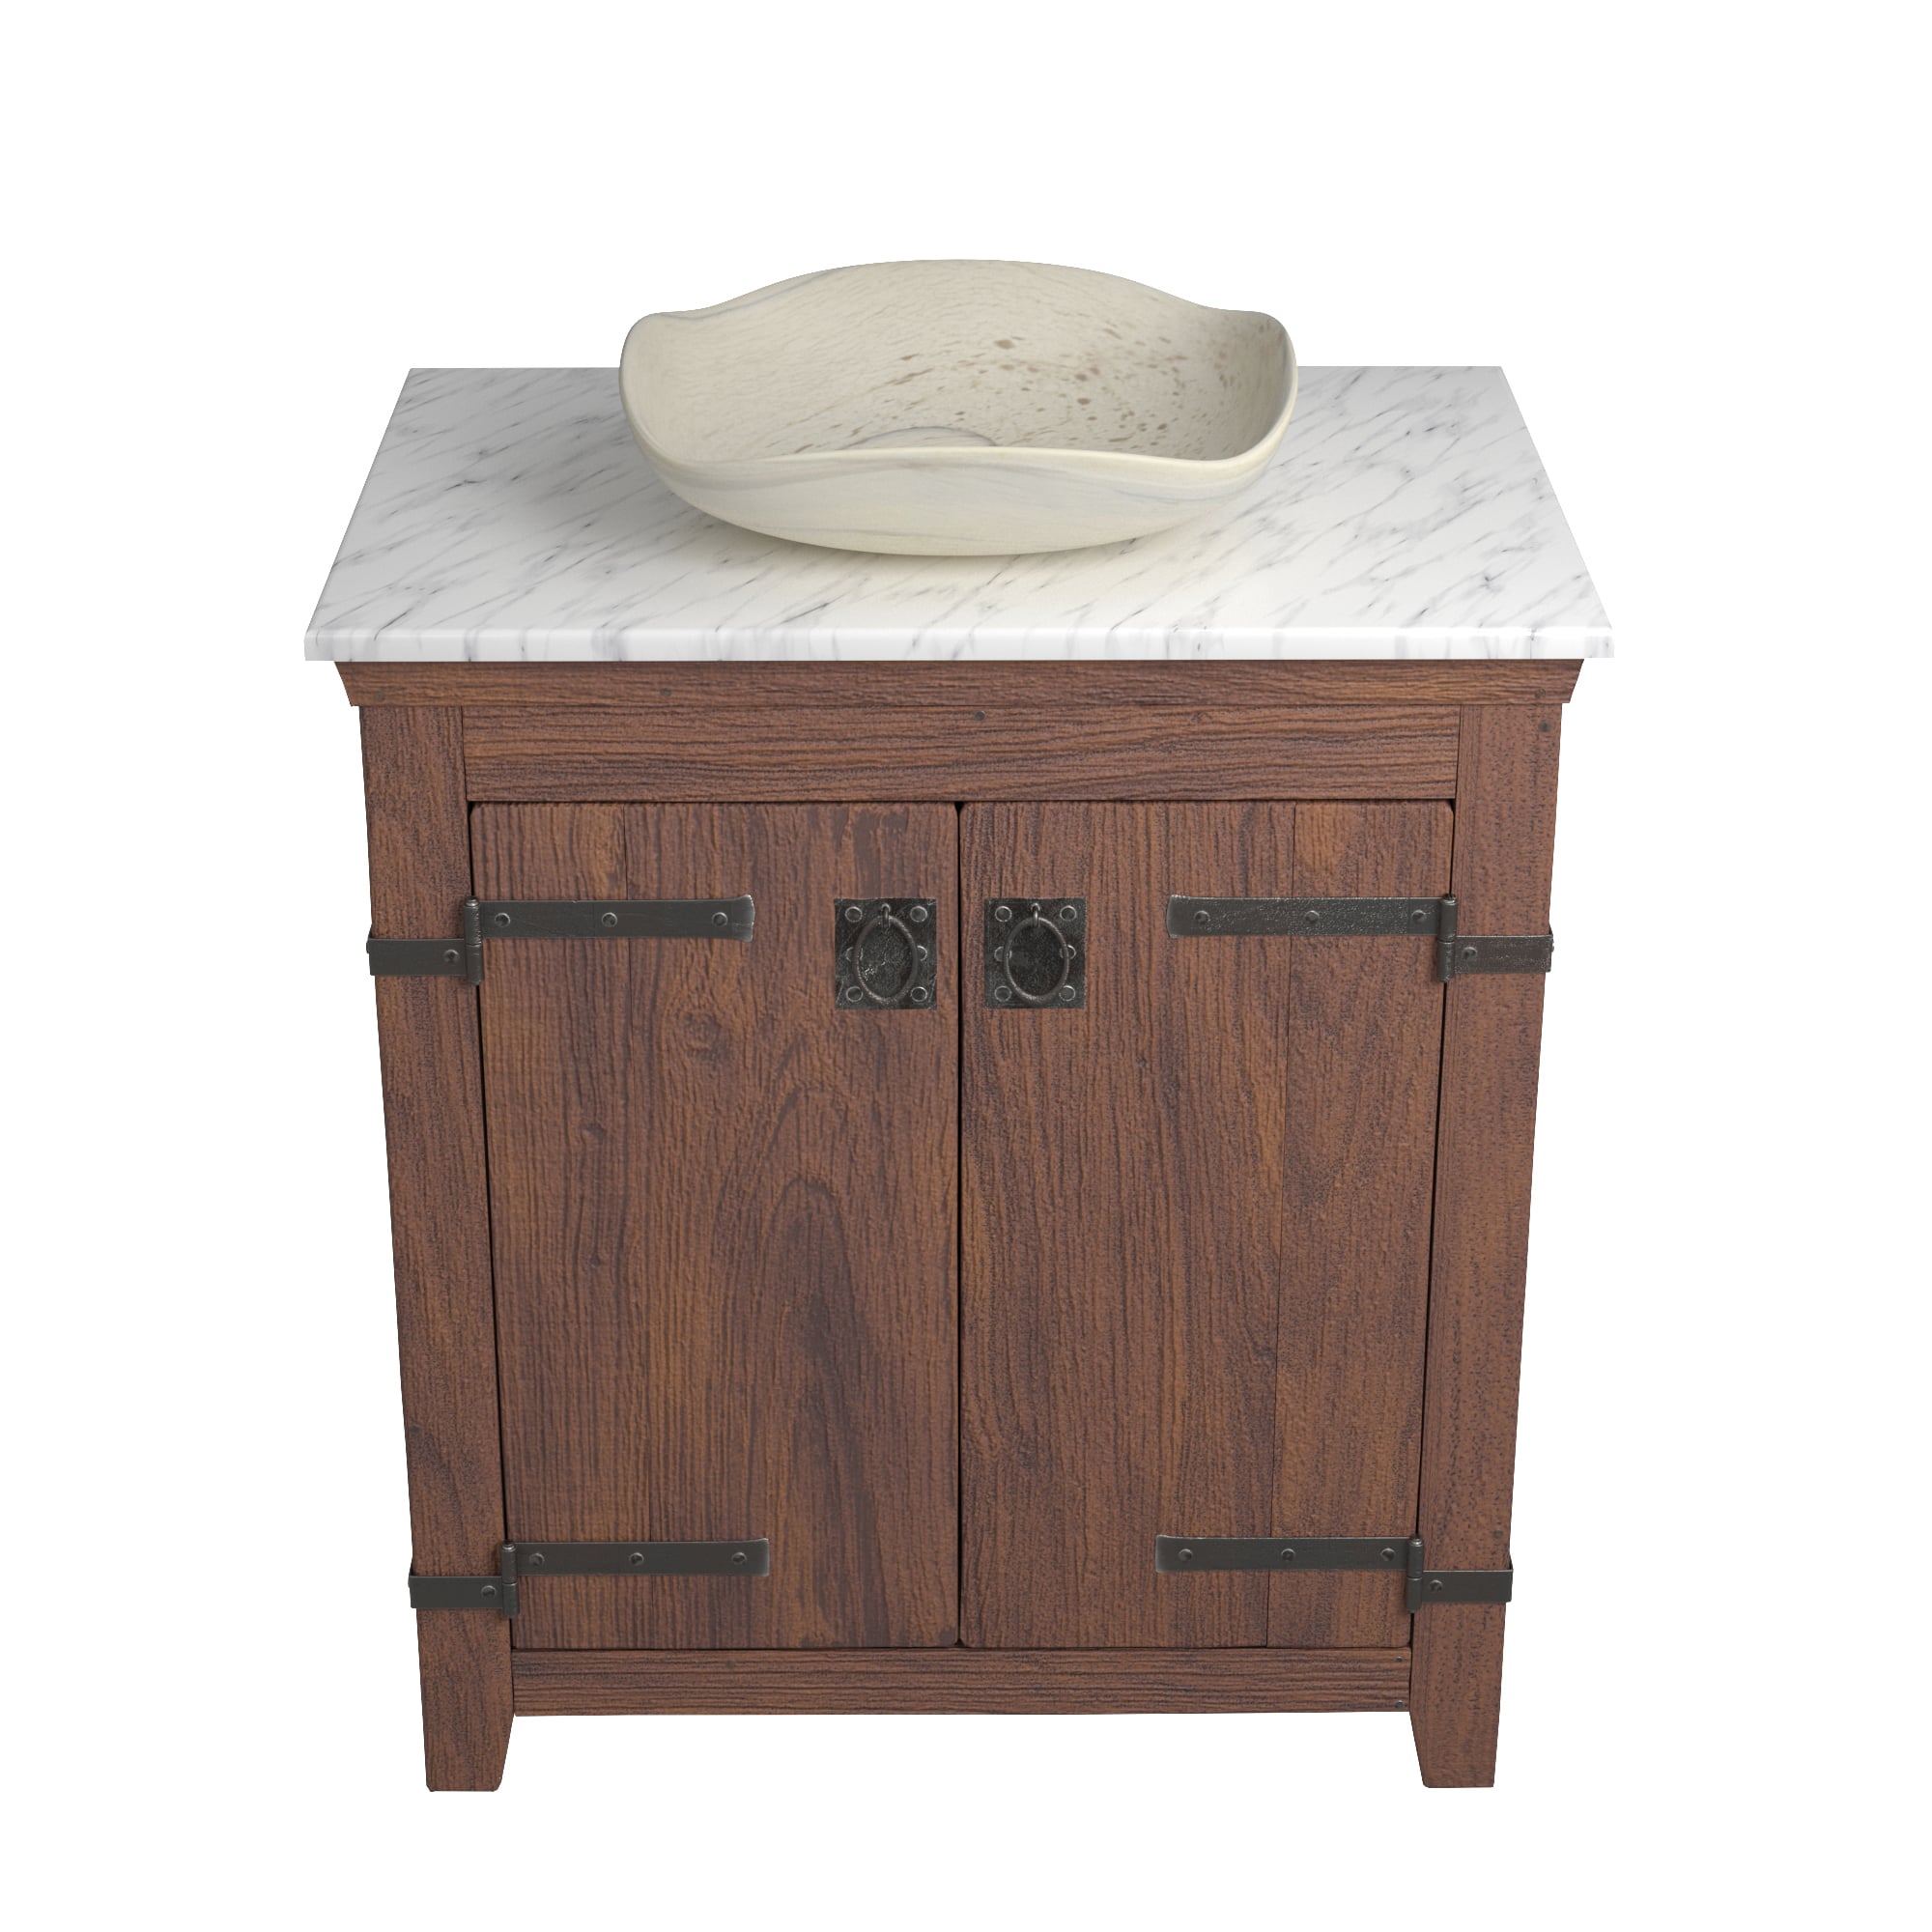 Native Trails 30" Americana Vanity in Chestnut with Carrara Marble Top and Lido in Beachcomber, Single Faucet Hole, BND30-VB-CT-MG-019